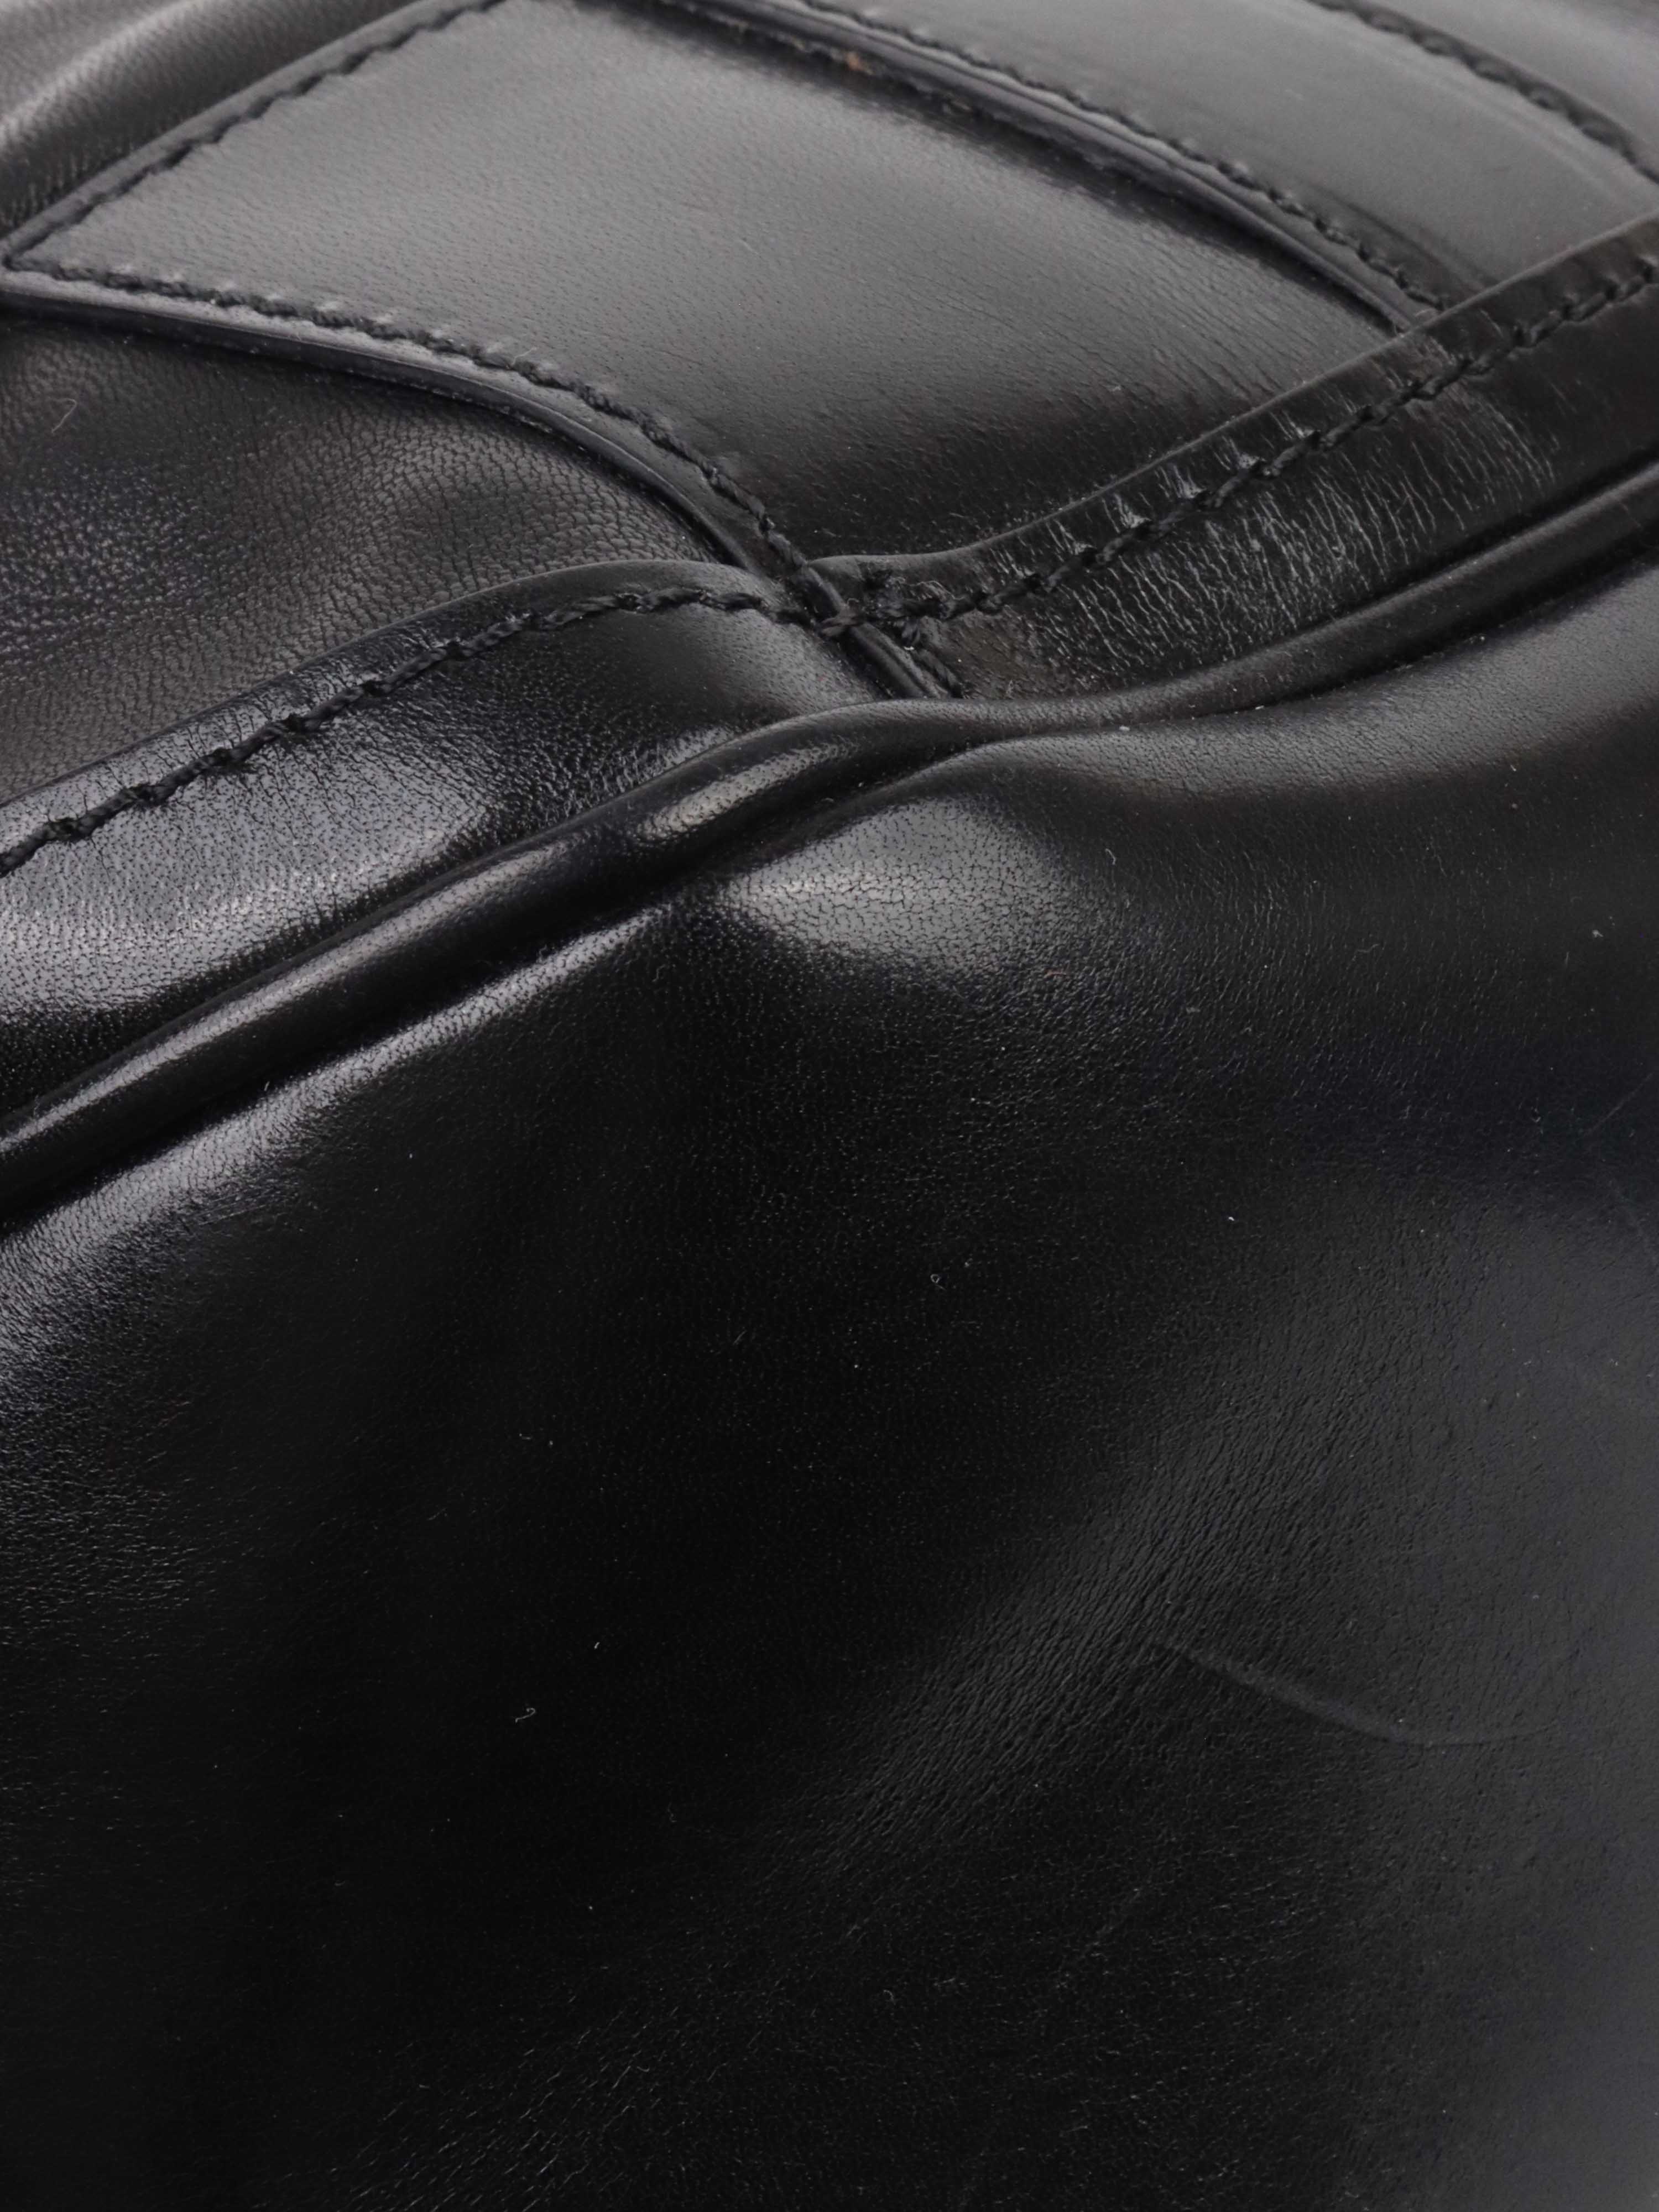 Burberry Black Large Tote.